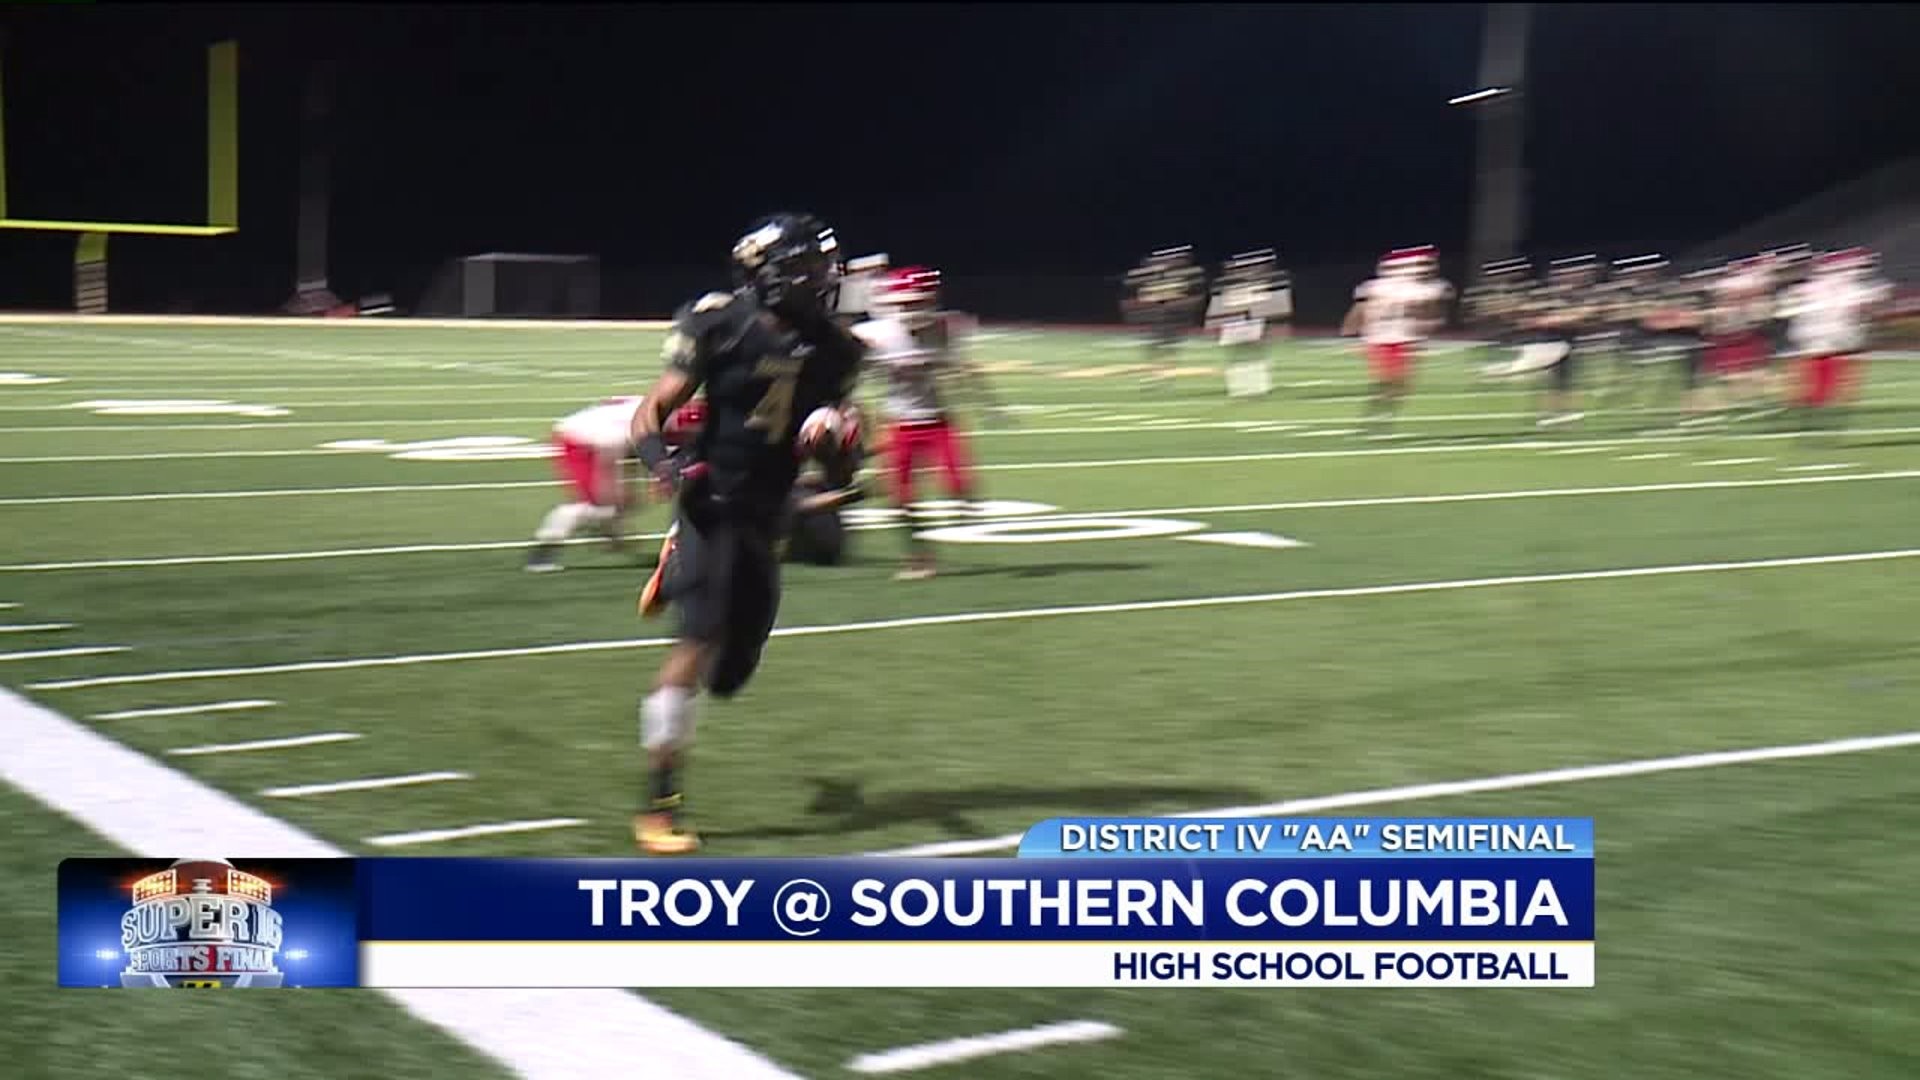 Troy @ Southern Columbia